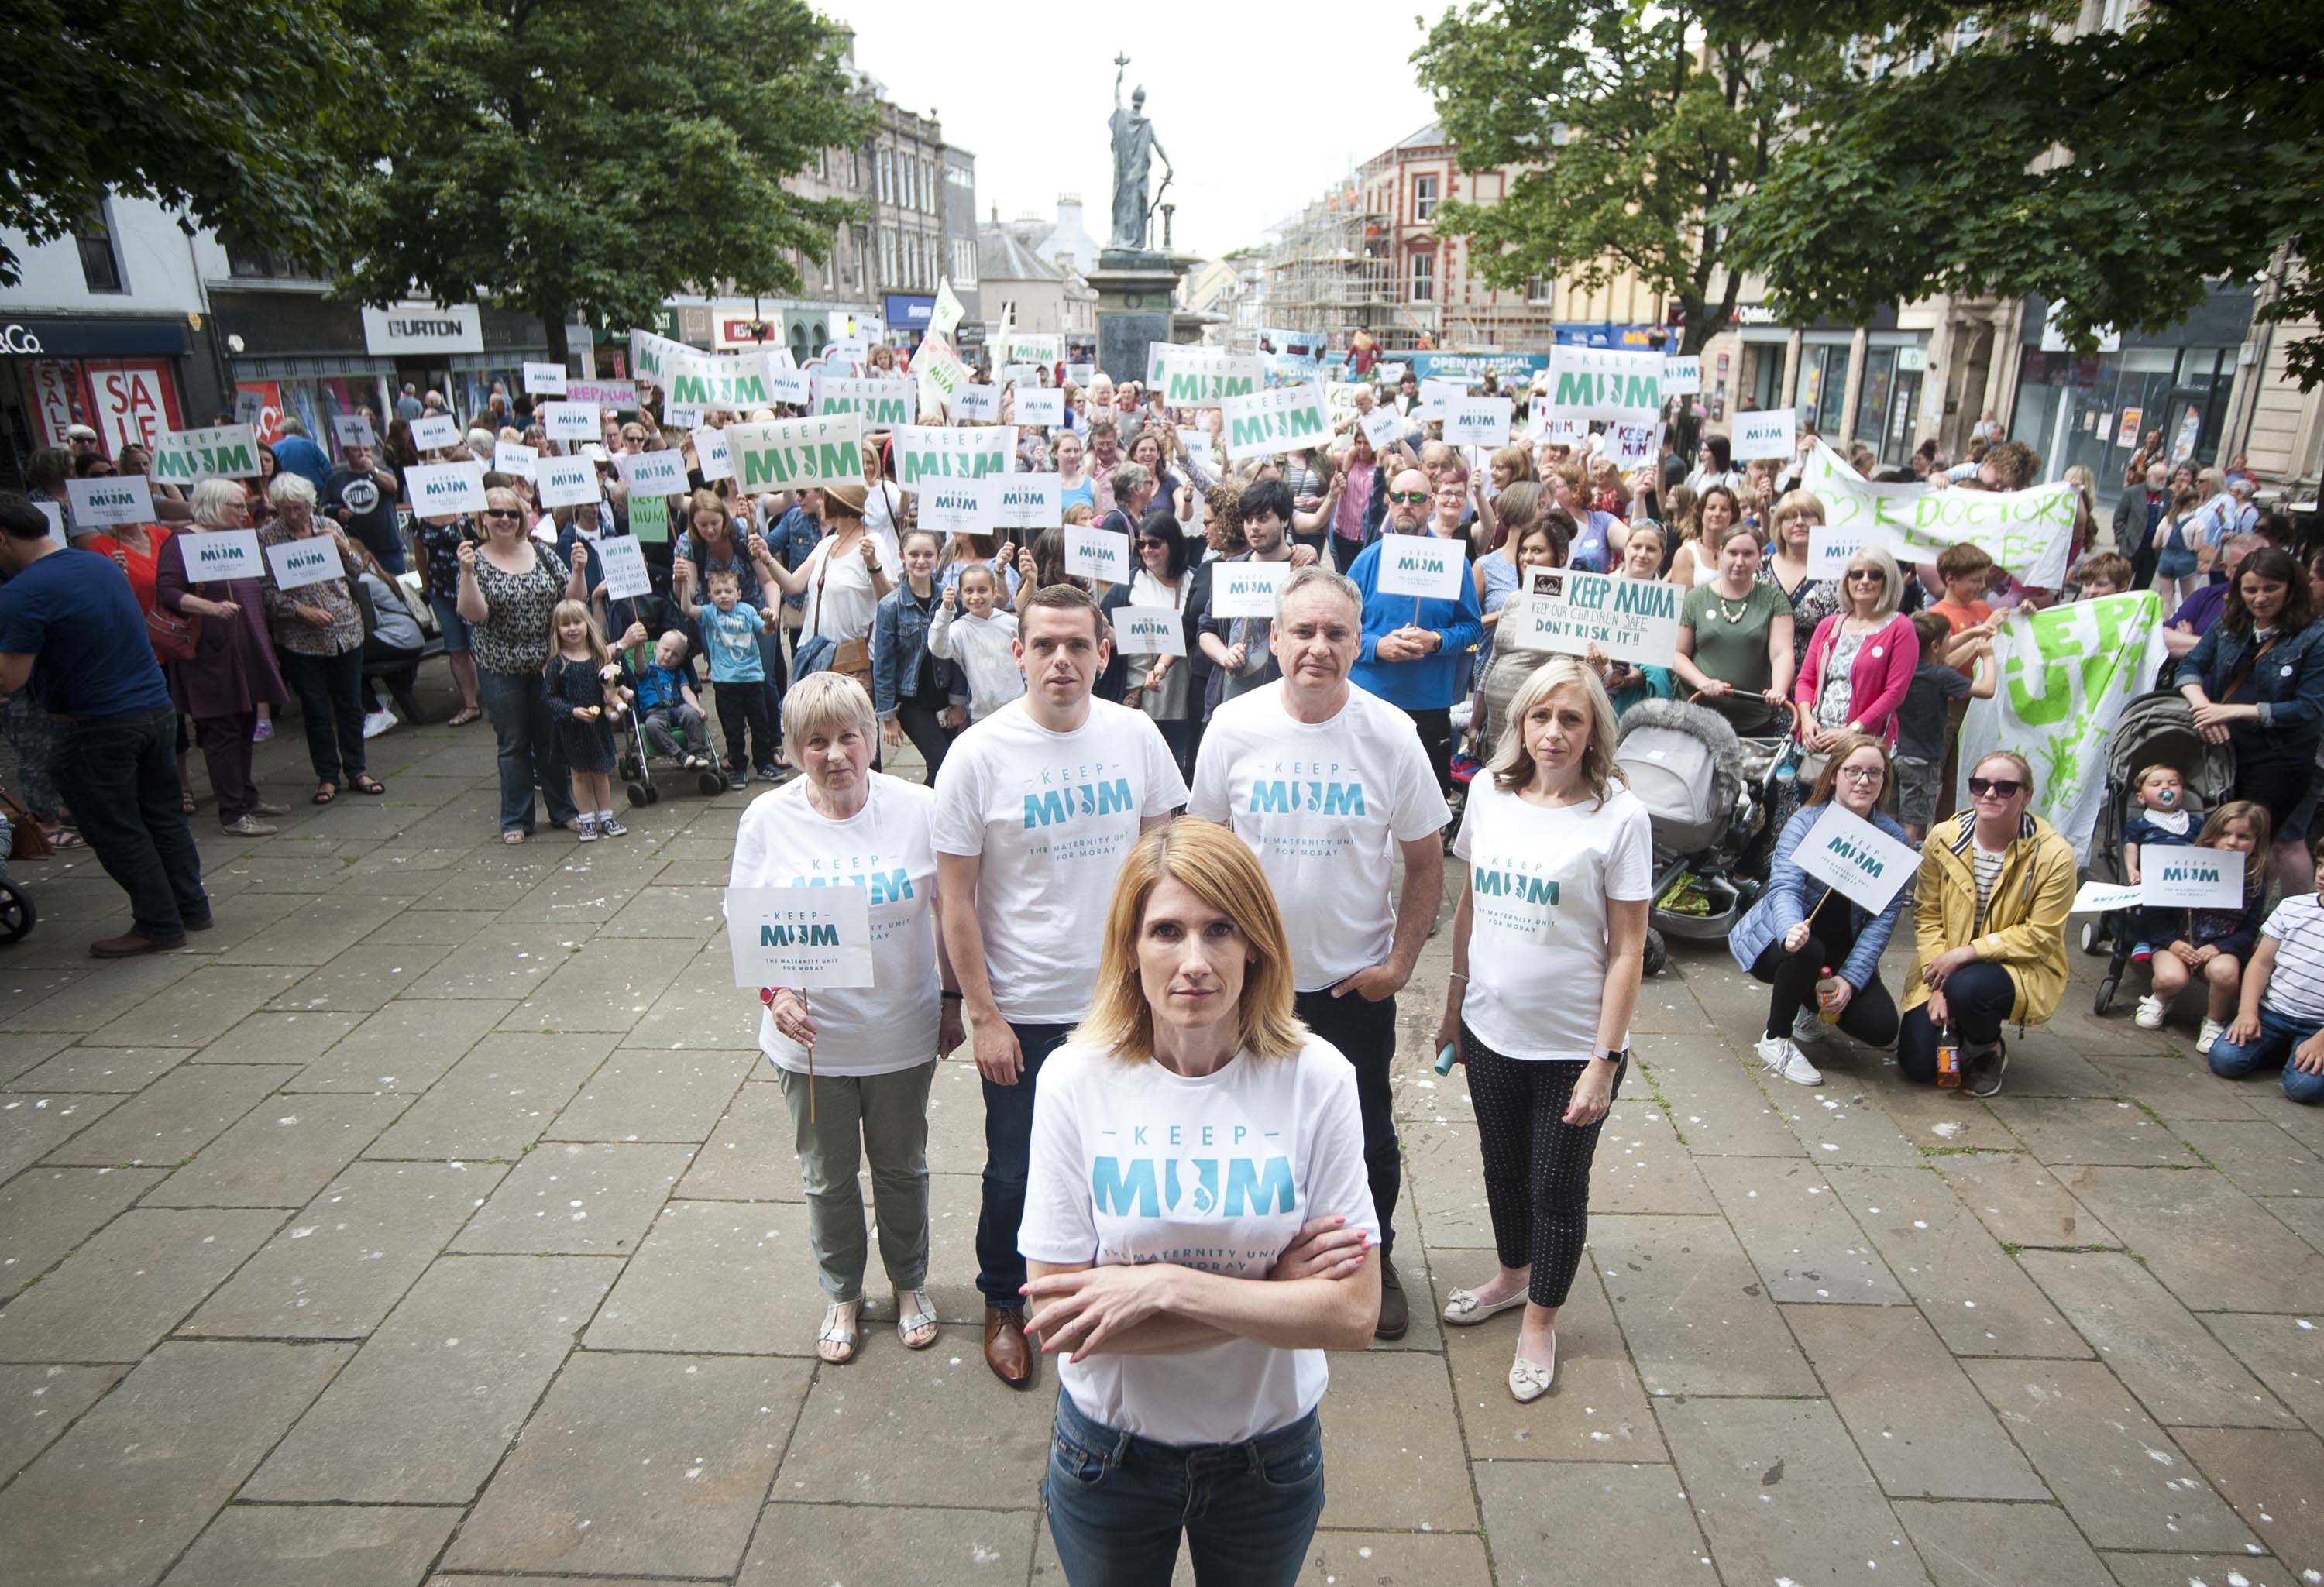 Hundreds of Keep Mum protesters, many wearing white t-shirts and holding placards. Spokeswoman Kirsty Watson stands in the front with her arms folded.